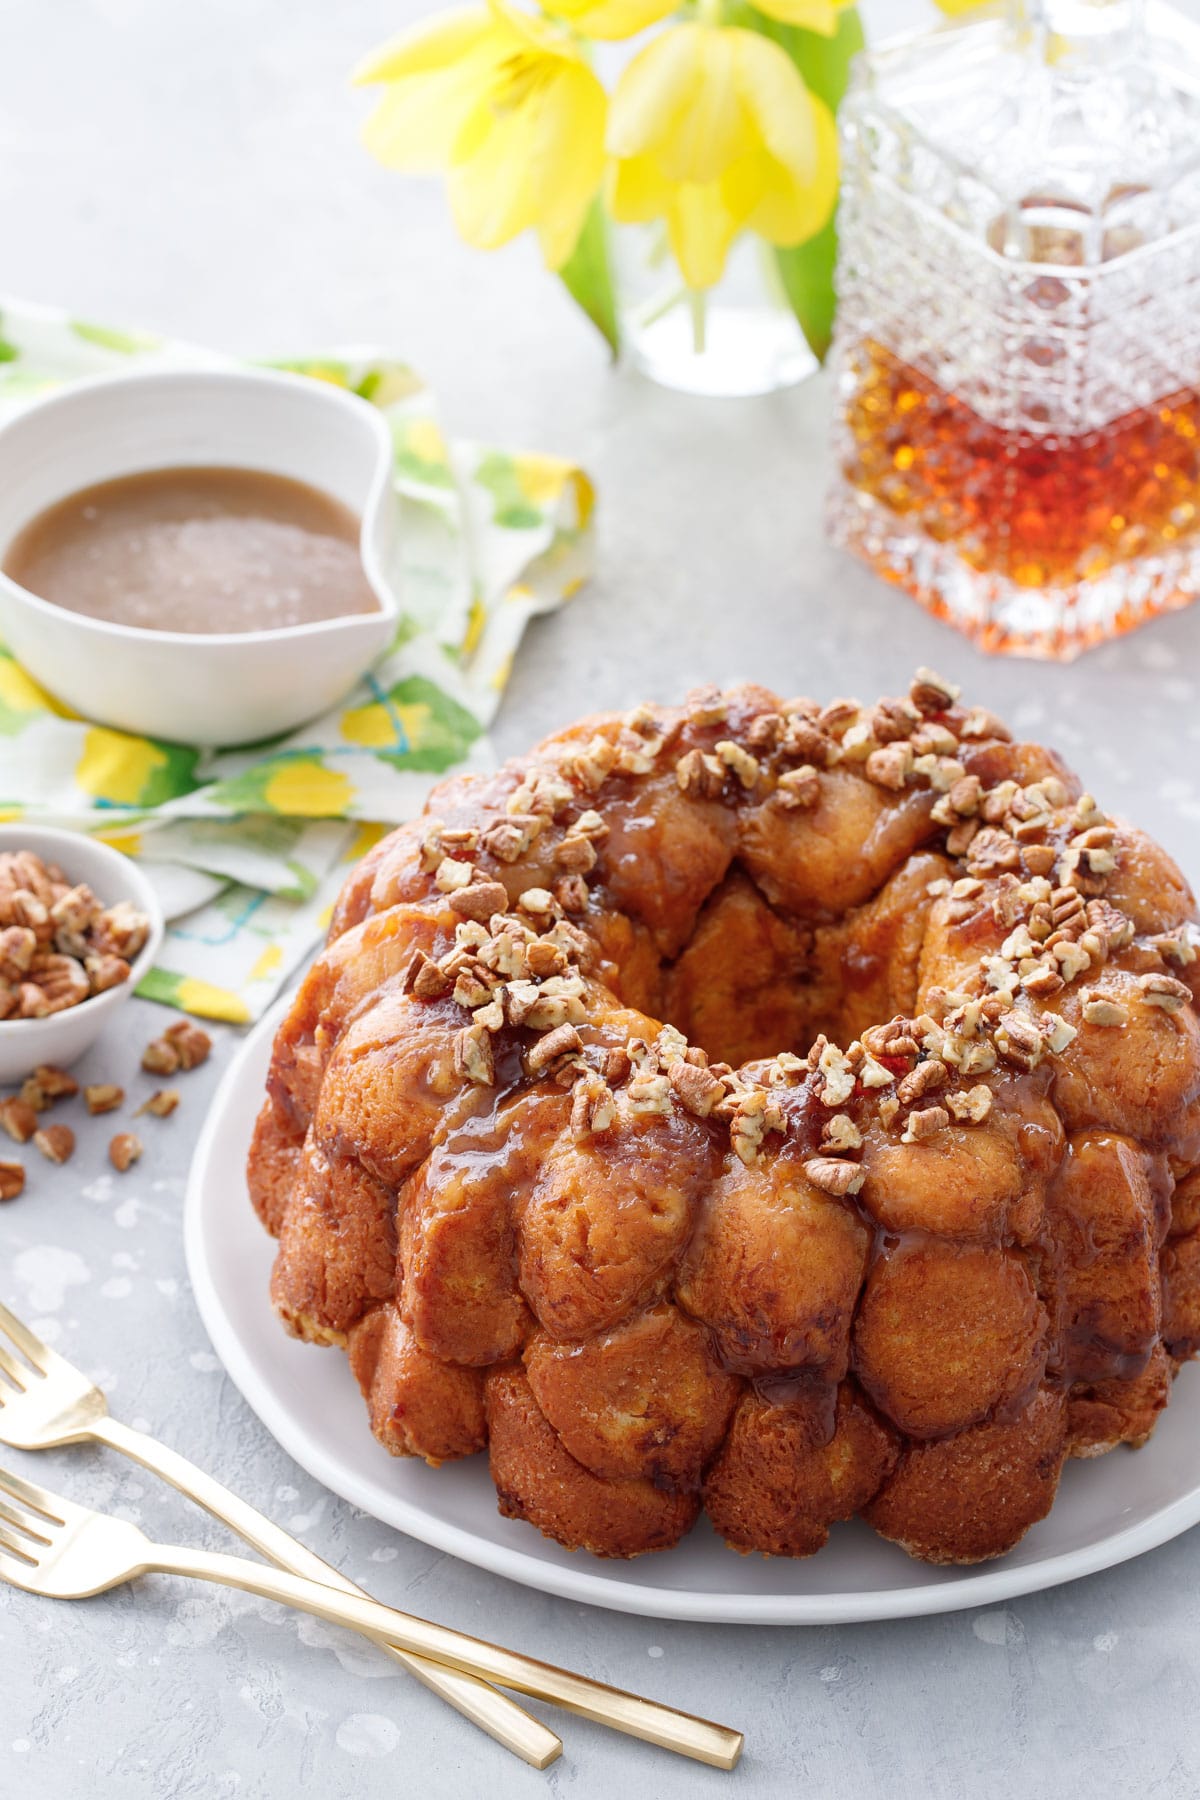 Homemade Eggless Monkey Bread  Mommys Home Cooking